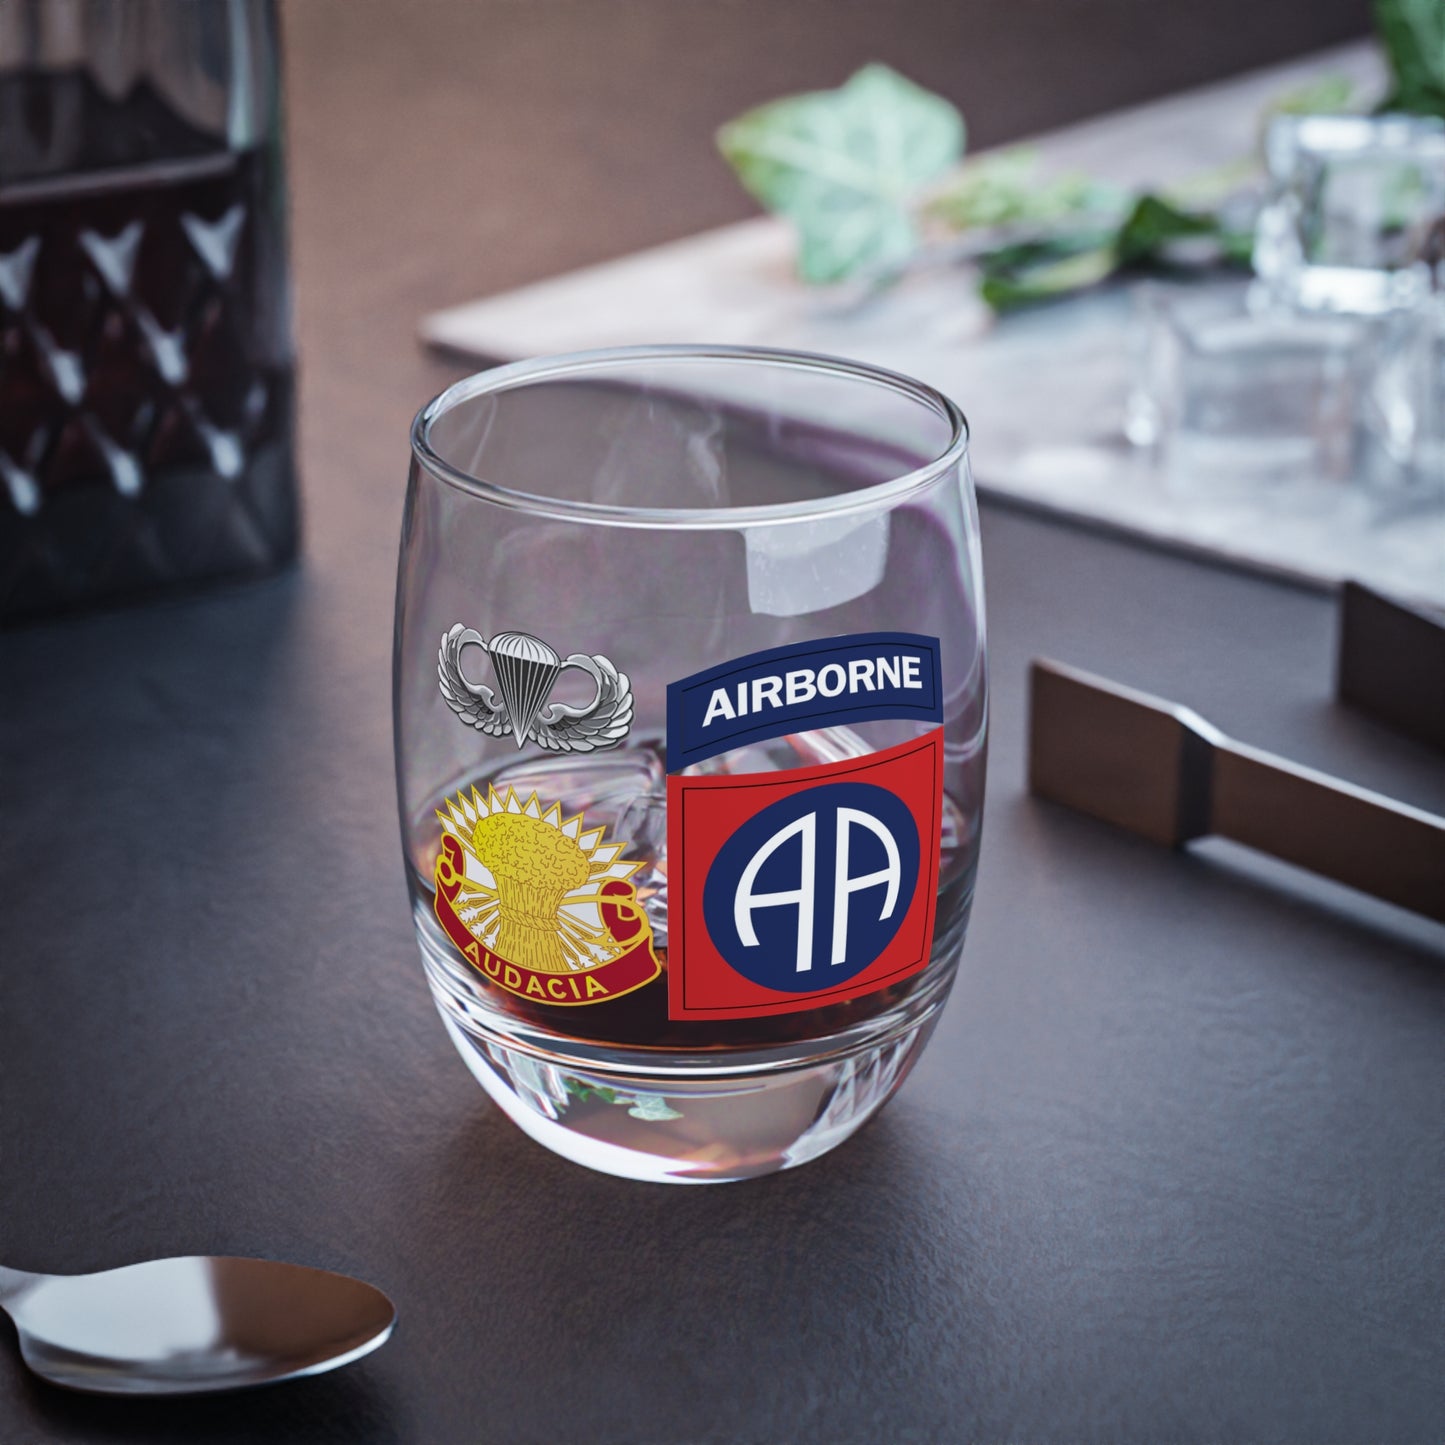 "Embrace Valor with Our Commemorative Whiskey Glass | 3-4 ADAR Tribute"